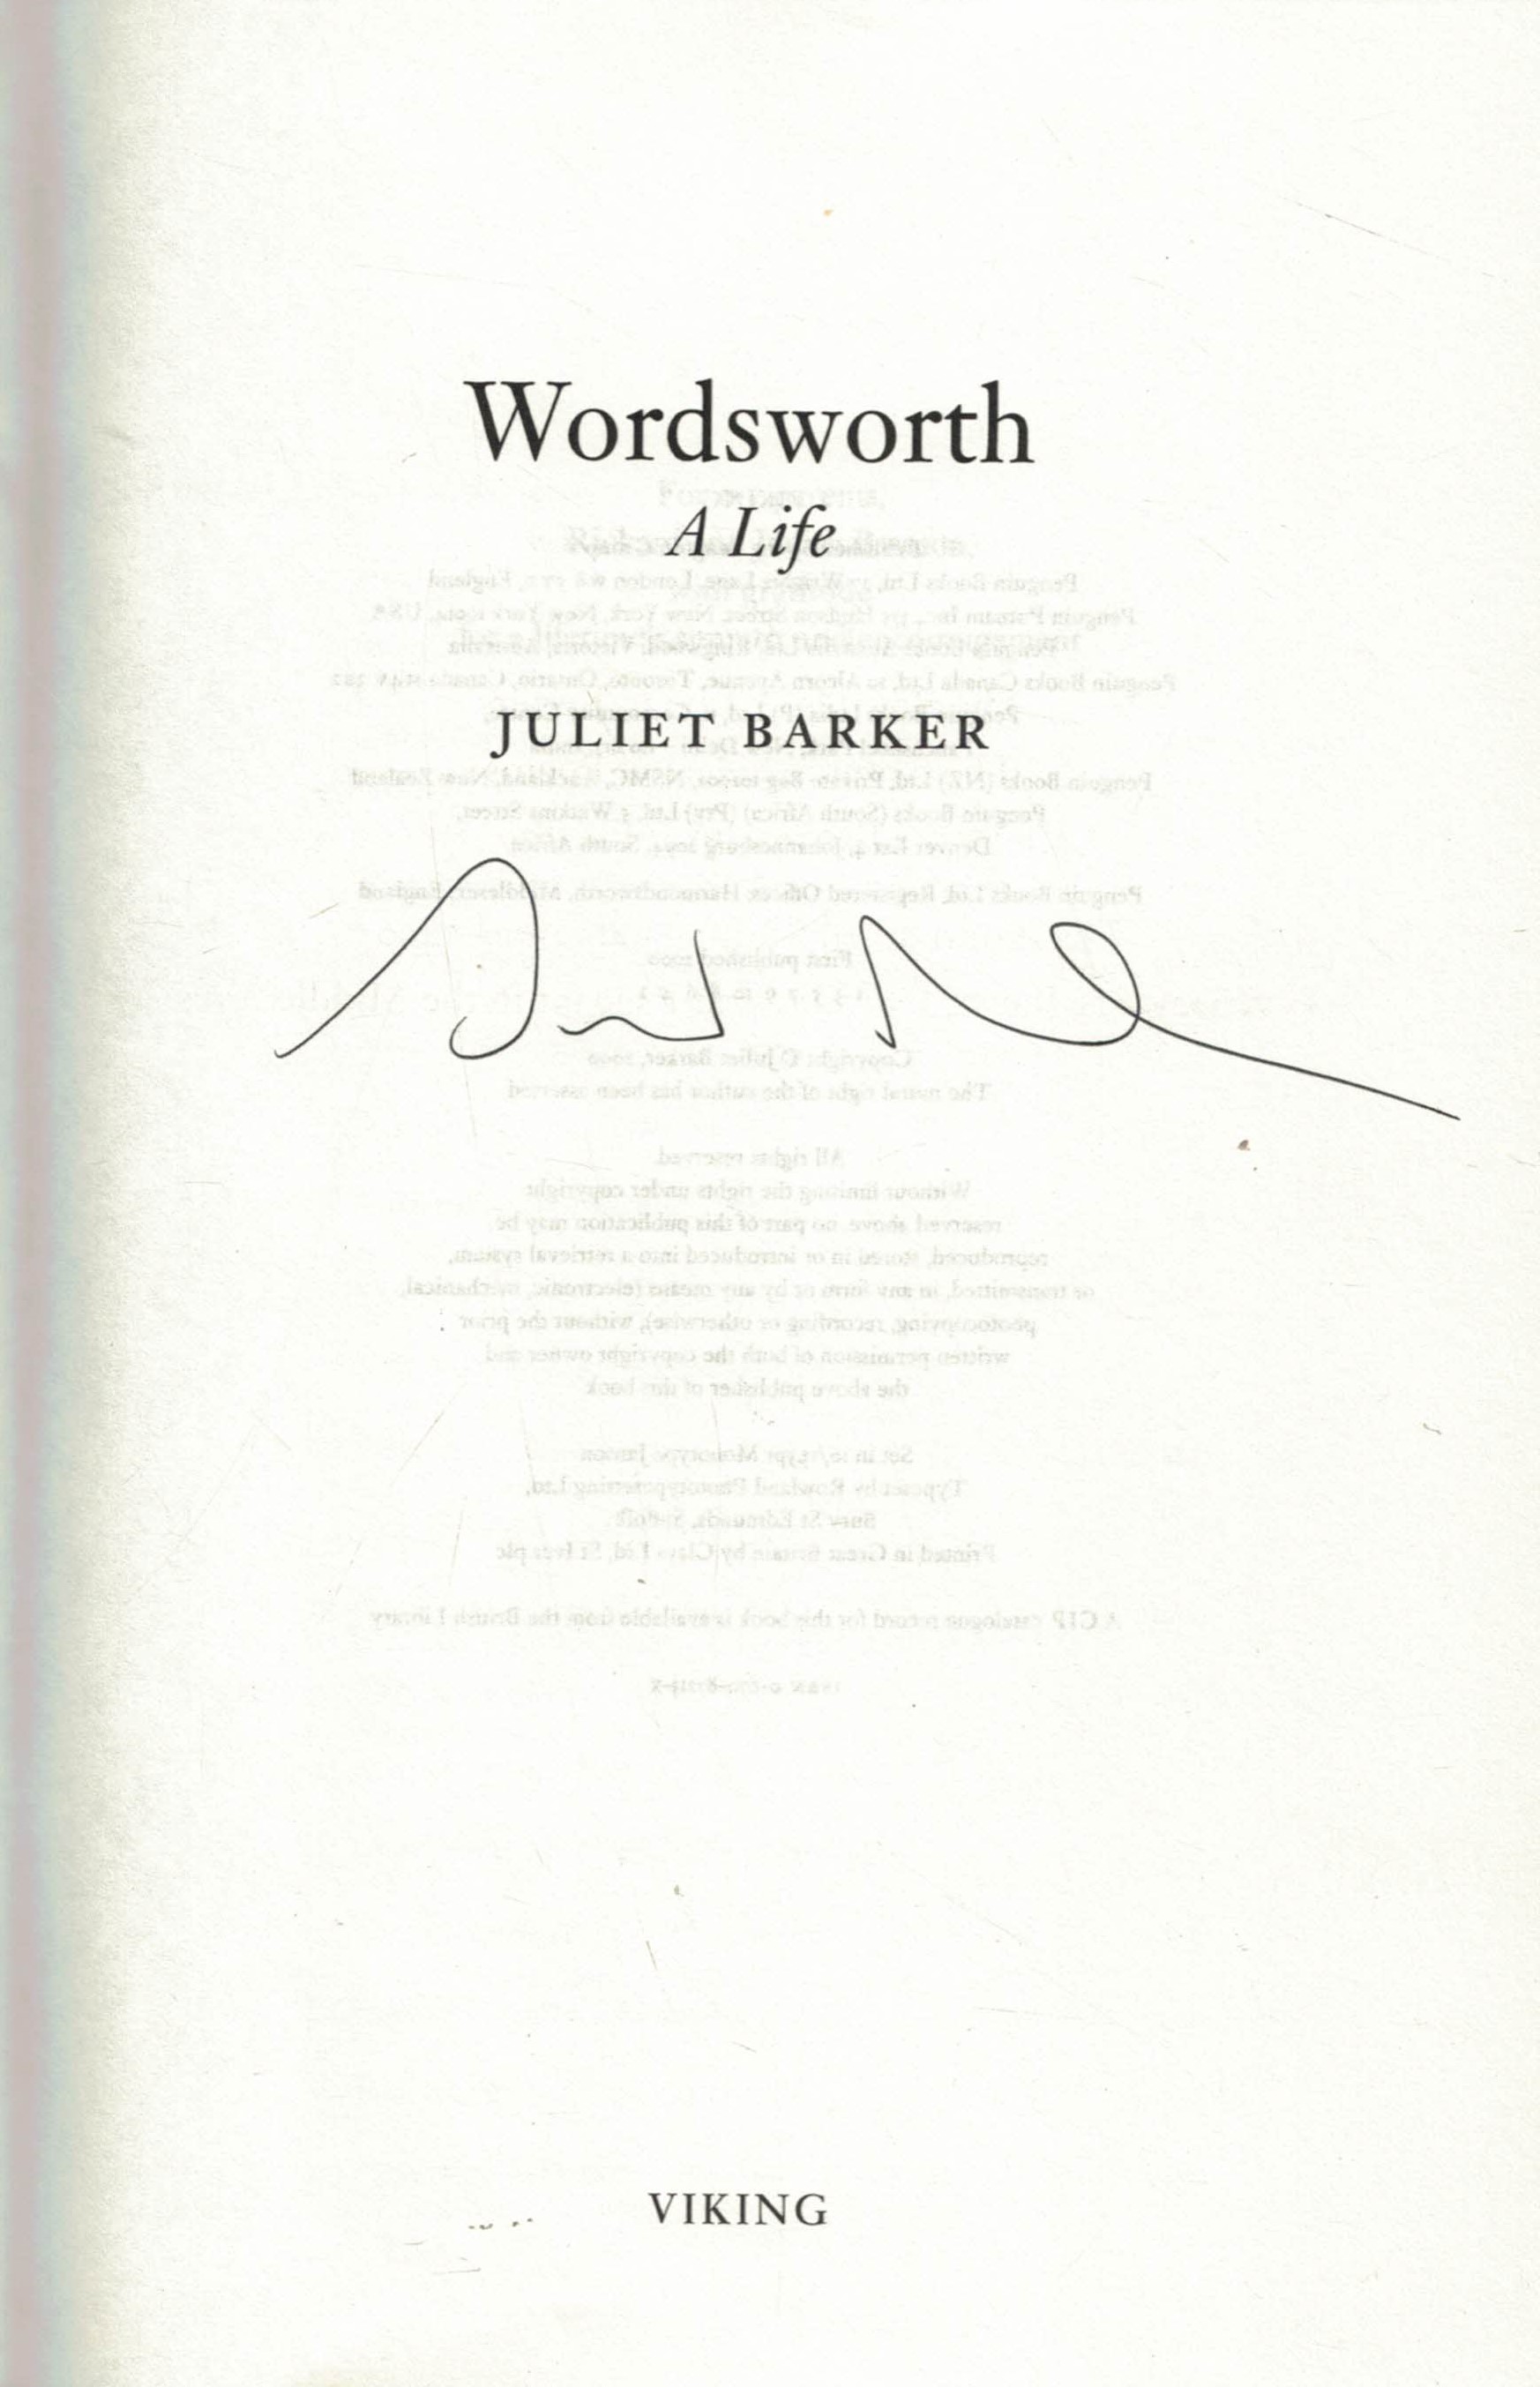 Wordsworth. A Life. Signed copy.